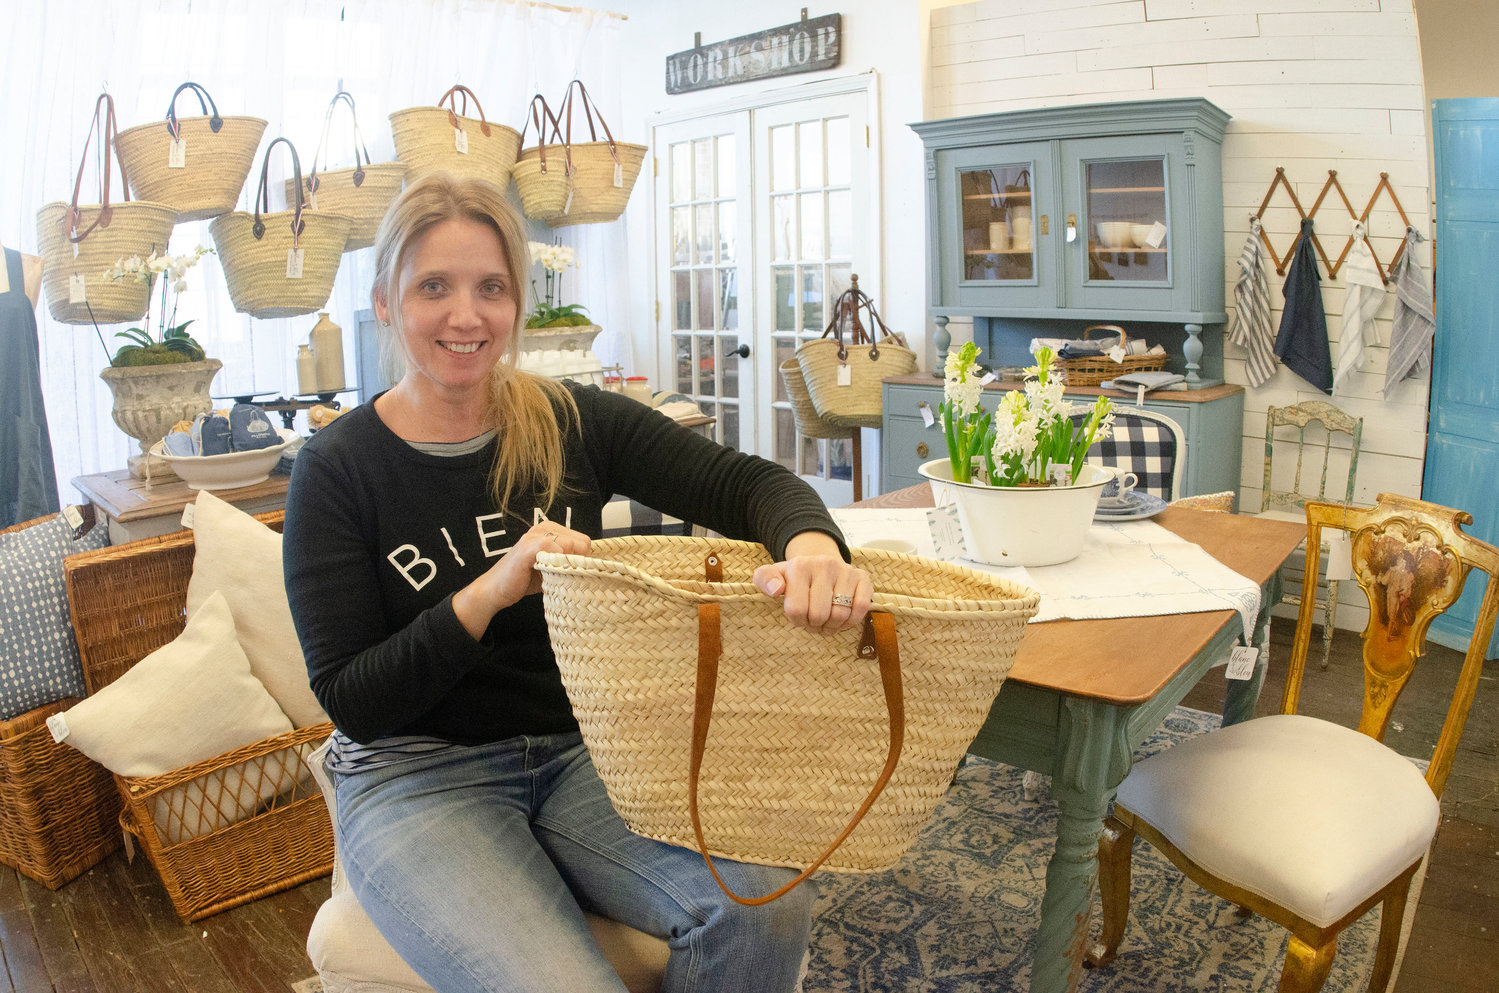 Blanc & Bleu proprietor Jenna Kinghorn with a French Market basket, one of many items sourced from Europe for both her online retail shop and her brick and mortar boutique in Unity Park. “I believe in things that are well-made and purposeful,” she said.